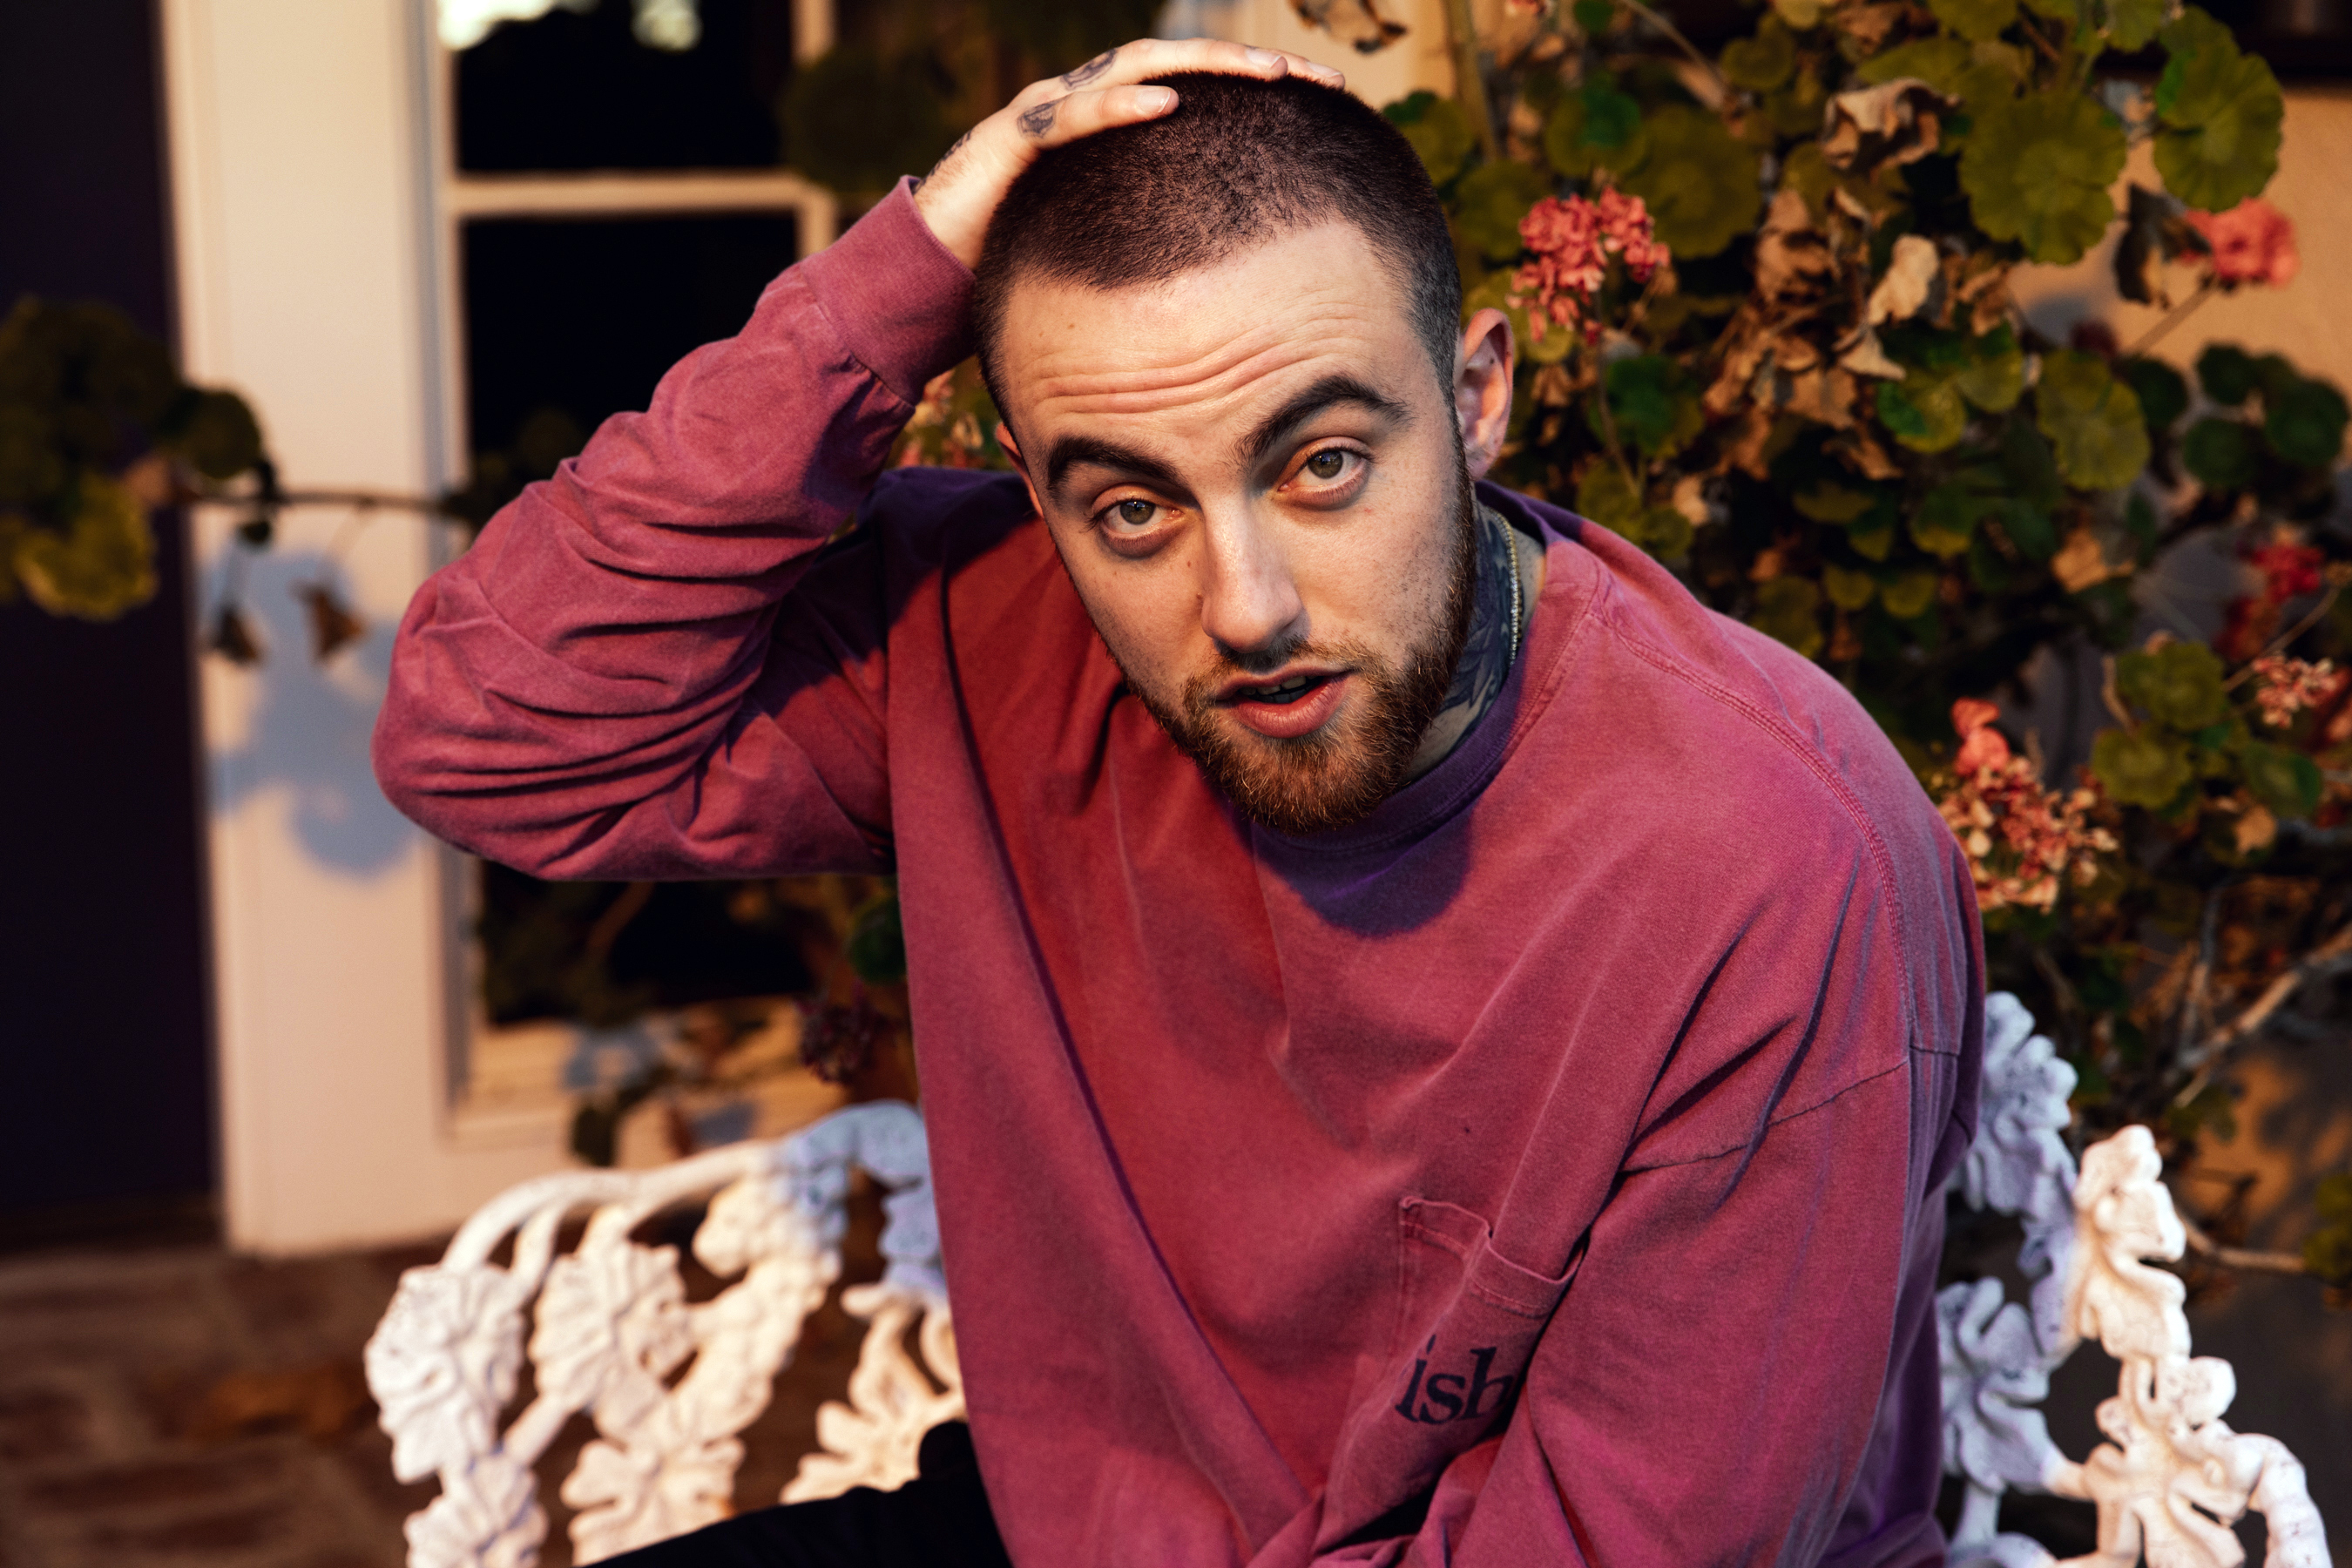 shows Mac Miller, subject of the article